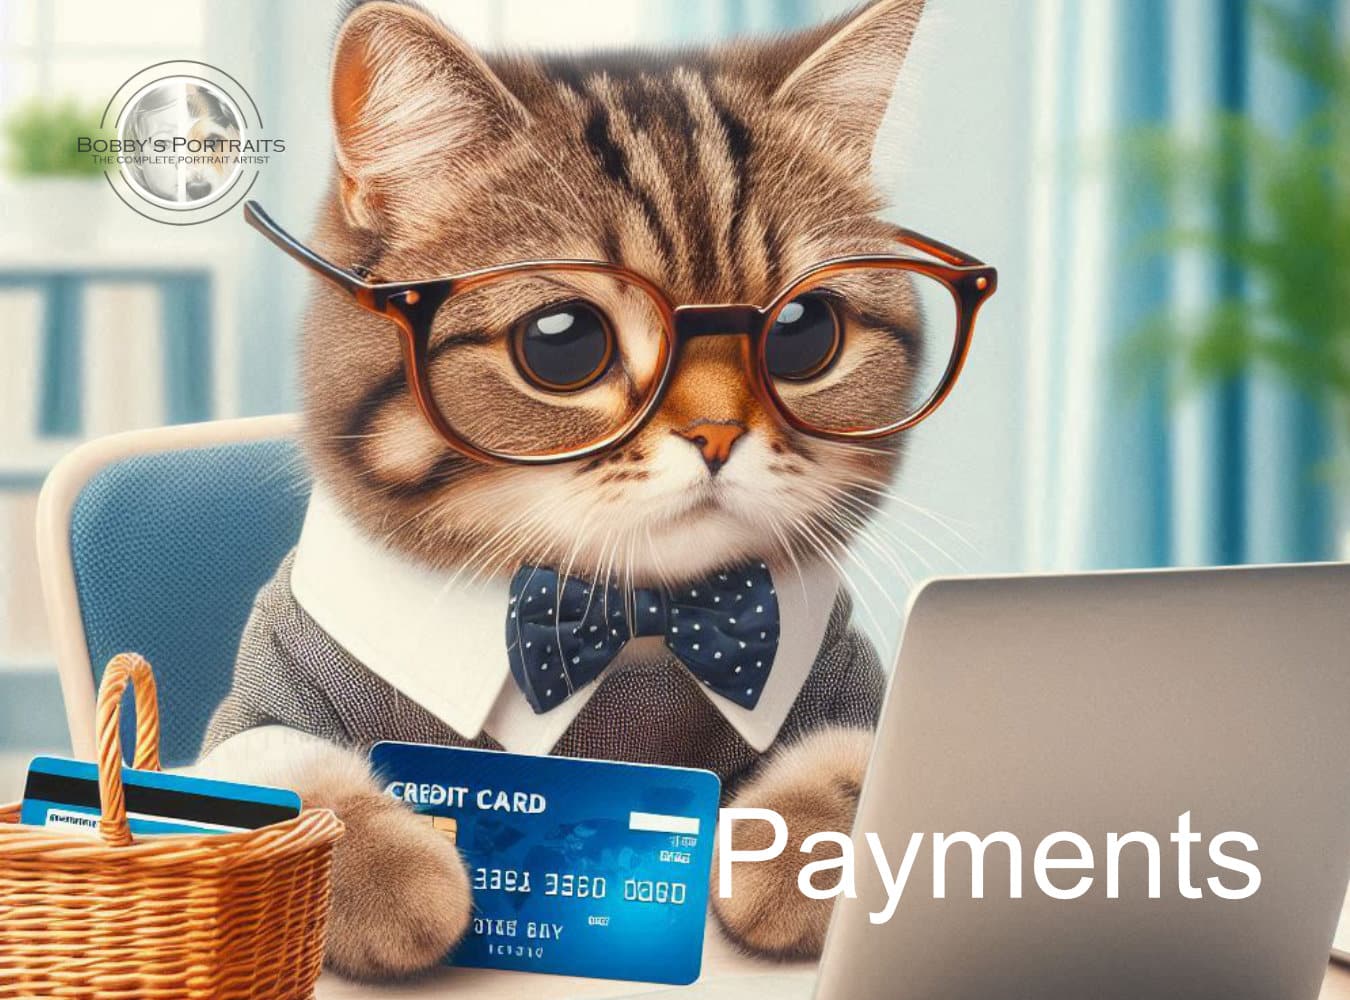 Featured image for “Completing payments”